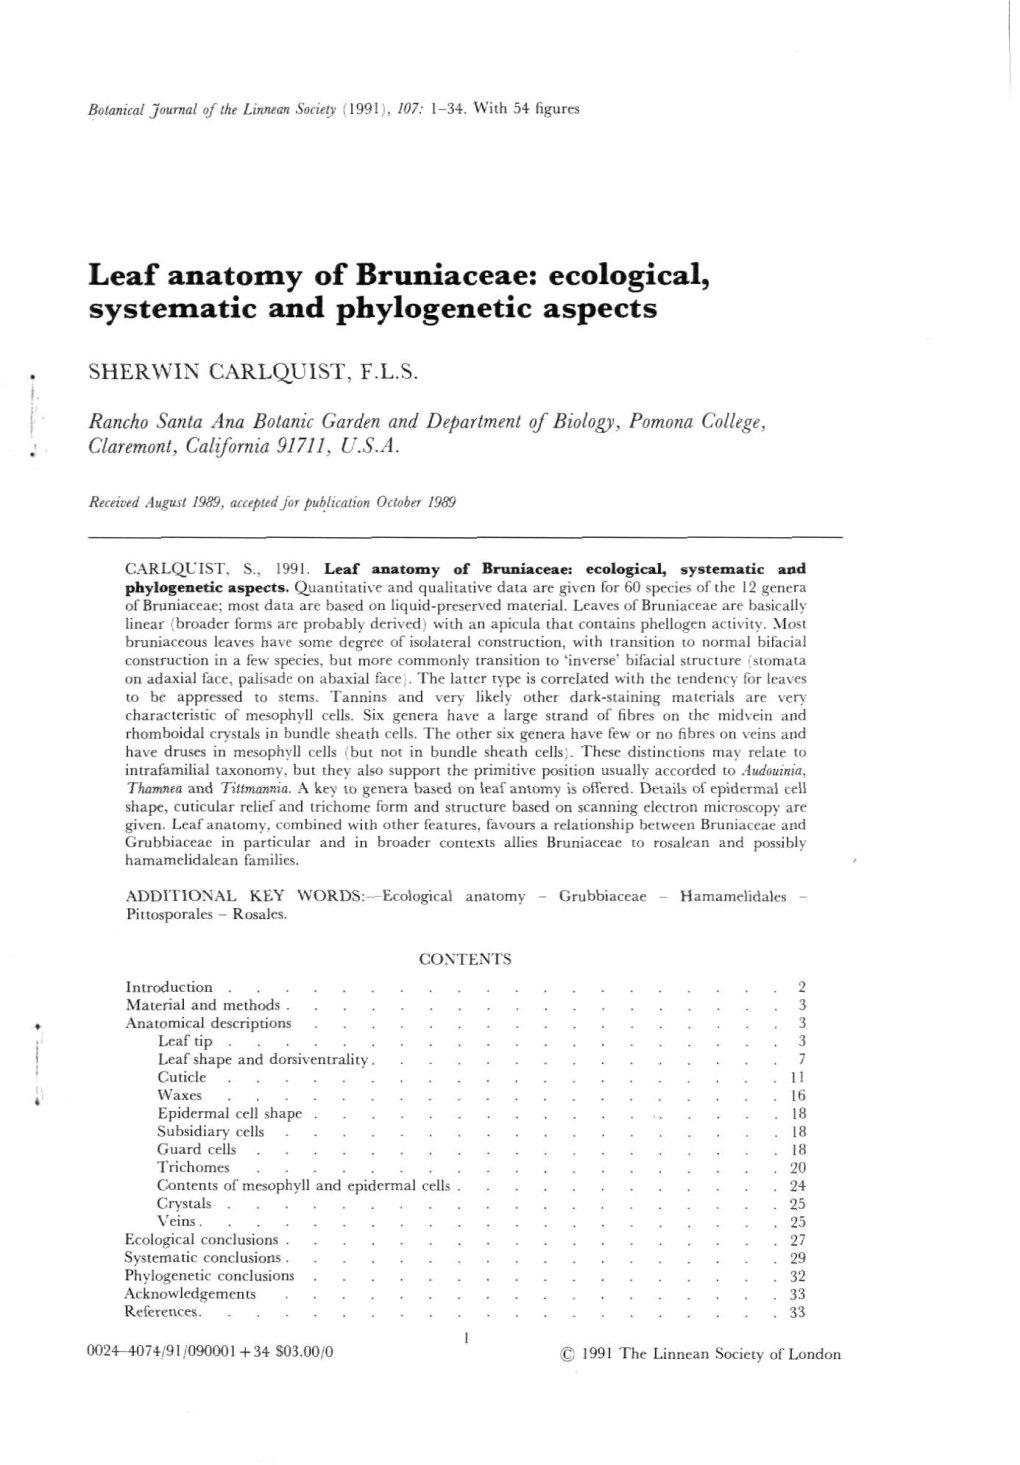 Leaf Anatomy of Bruniaceae: Ecological, Systematic and Phylogenetic Aspects